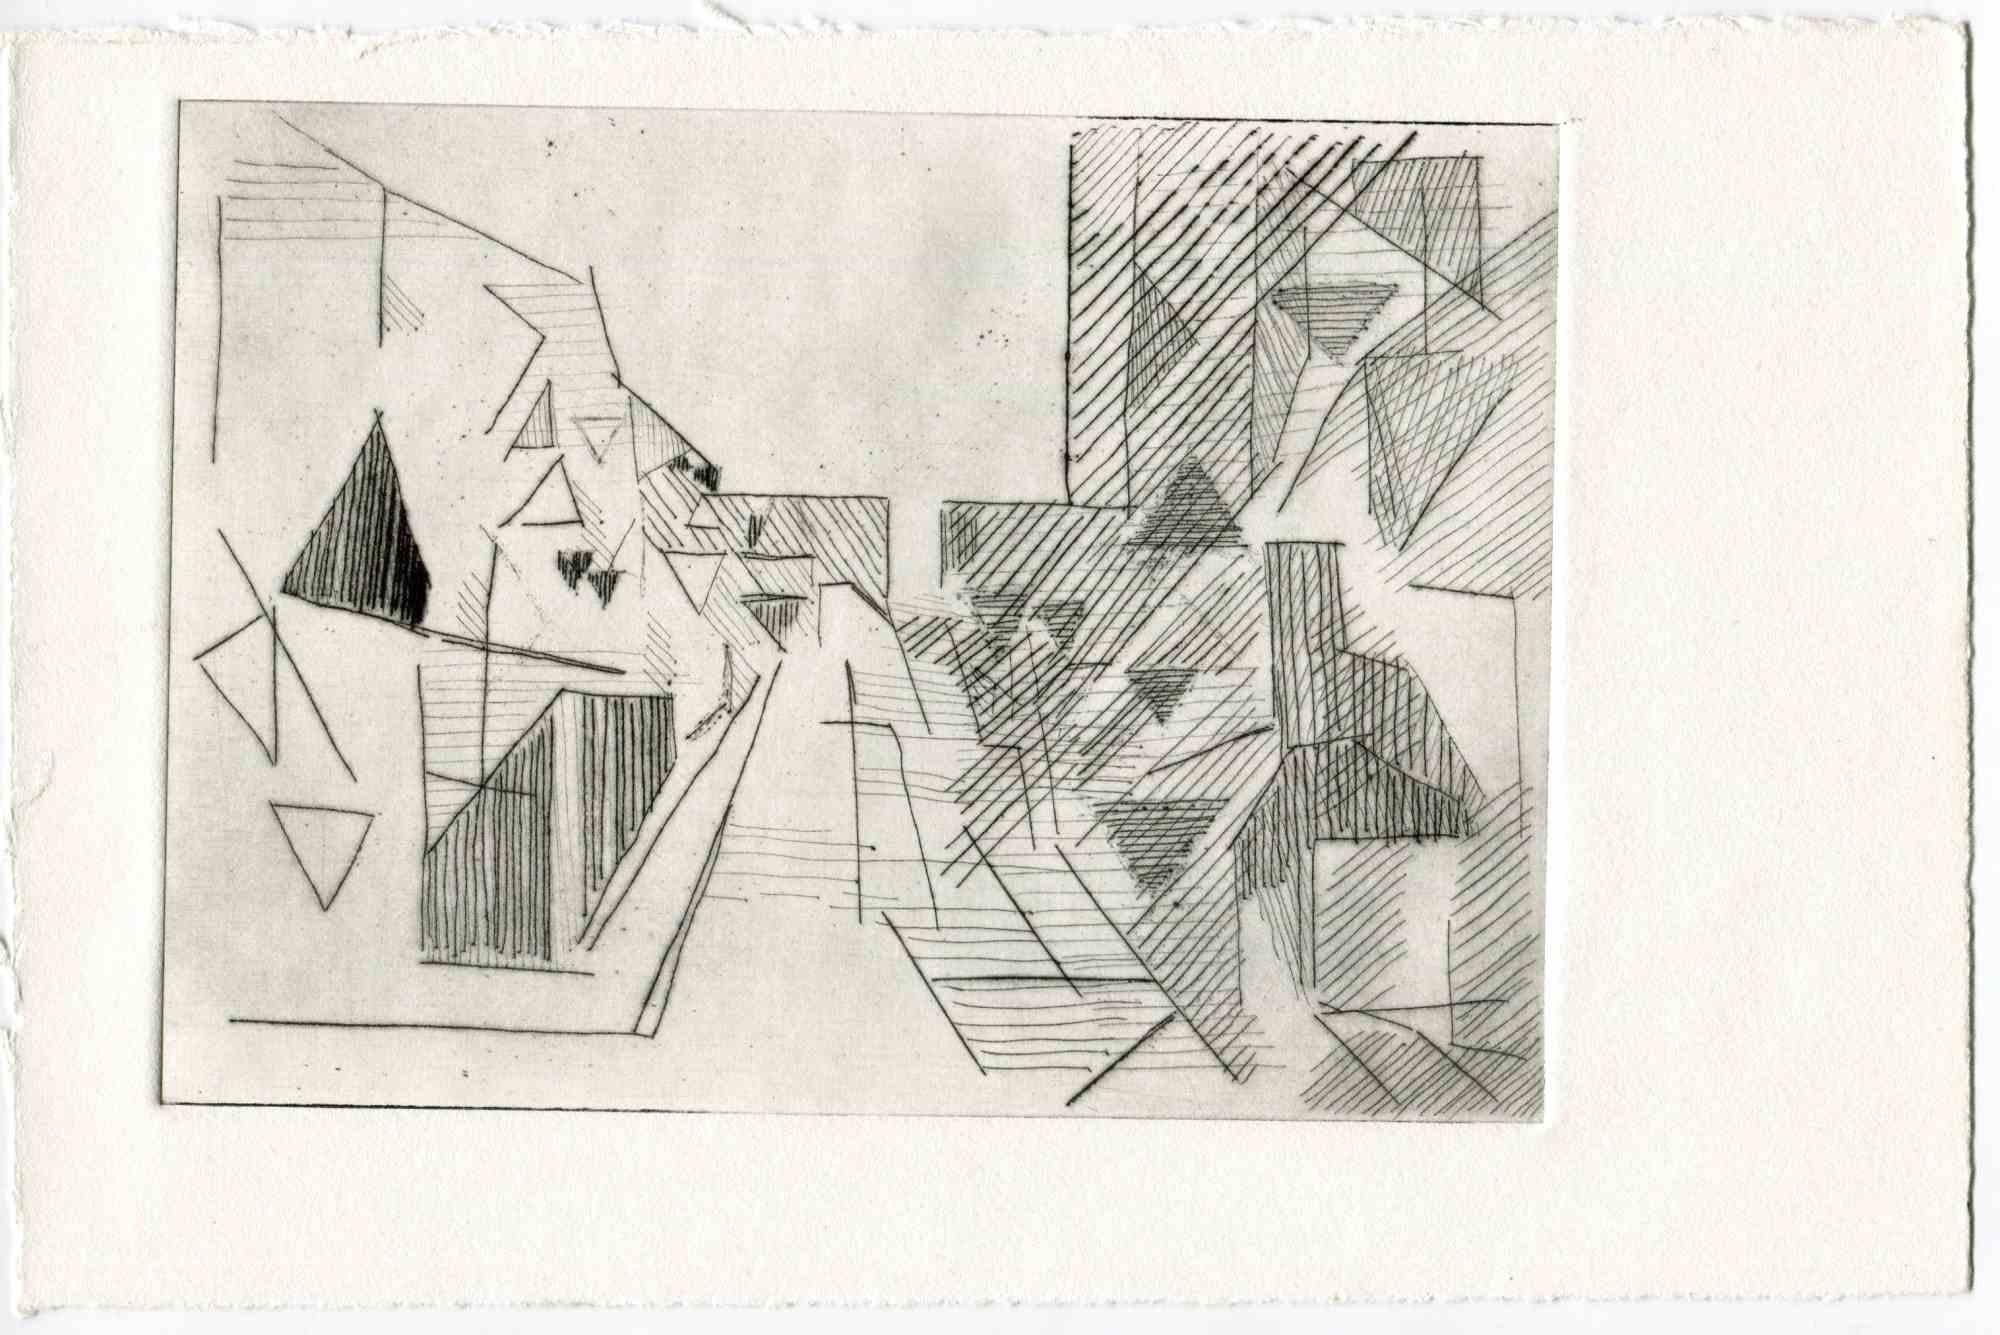 Unknown Figurative Print - City of Future - Original Etching and Drypoint - Mid-20th Century